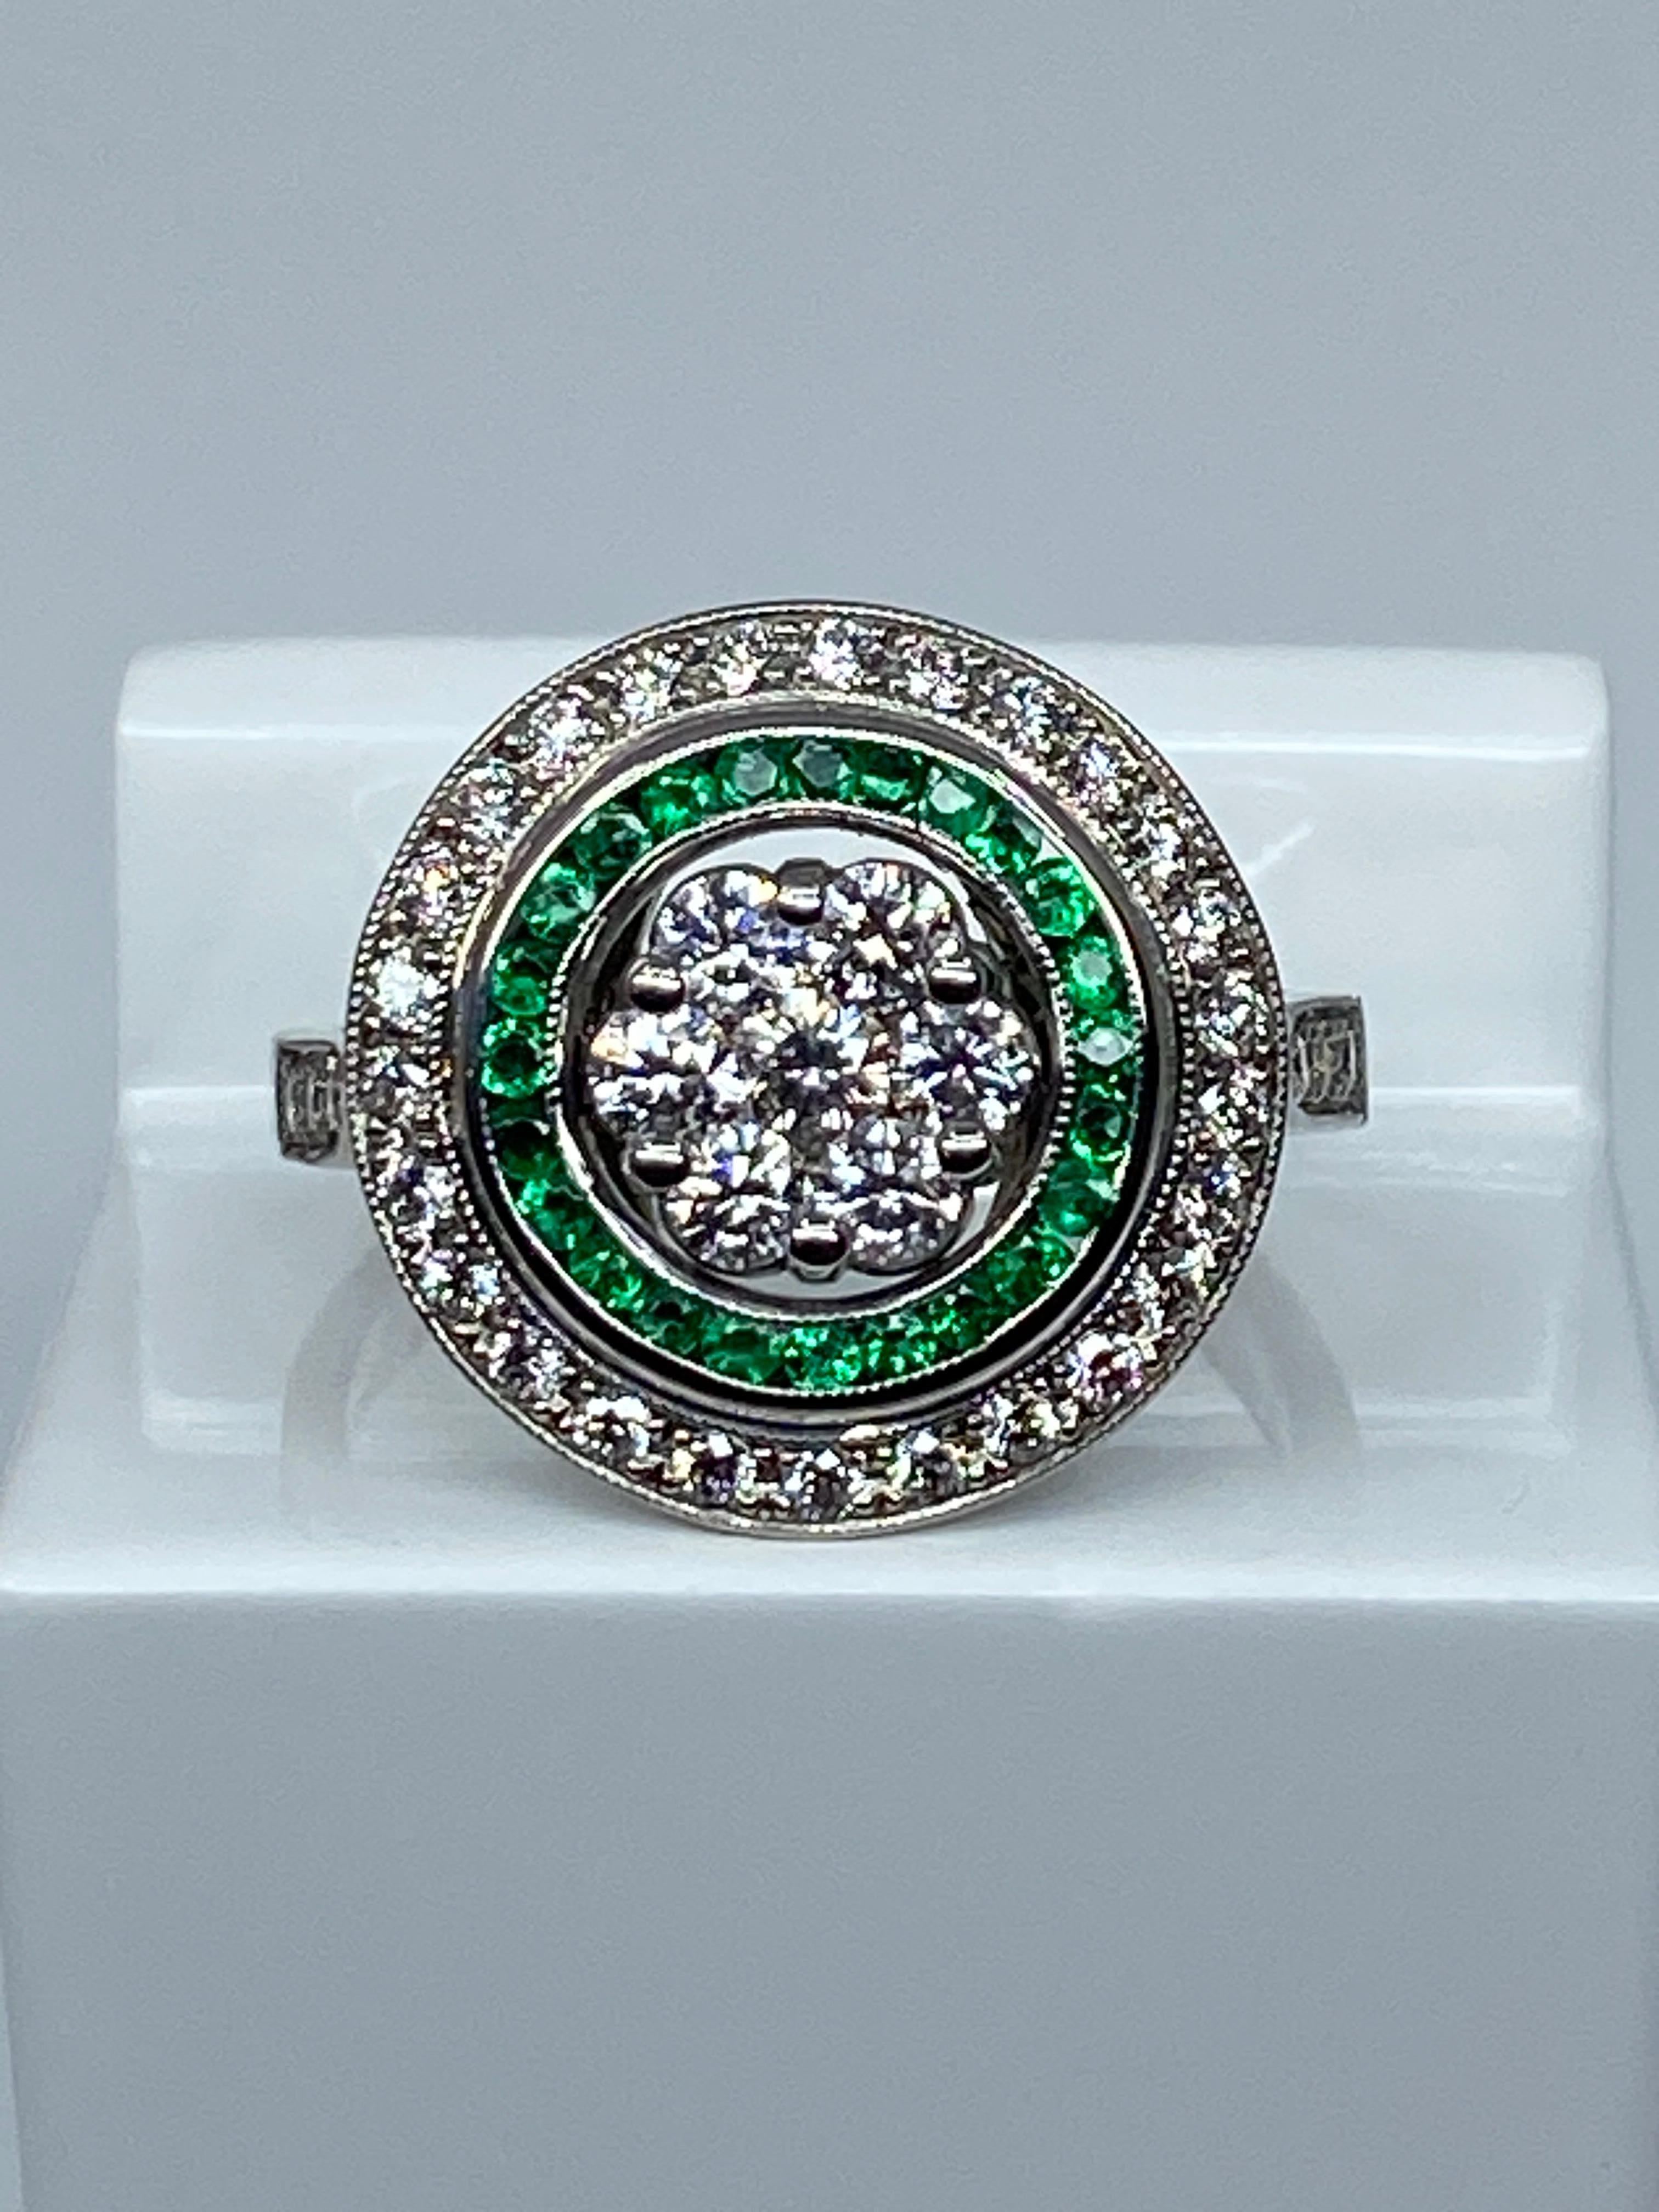 18 Carat Gold Round Ring Set with Calibrated Emeralds and Diamonds Art Déco Styl 9